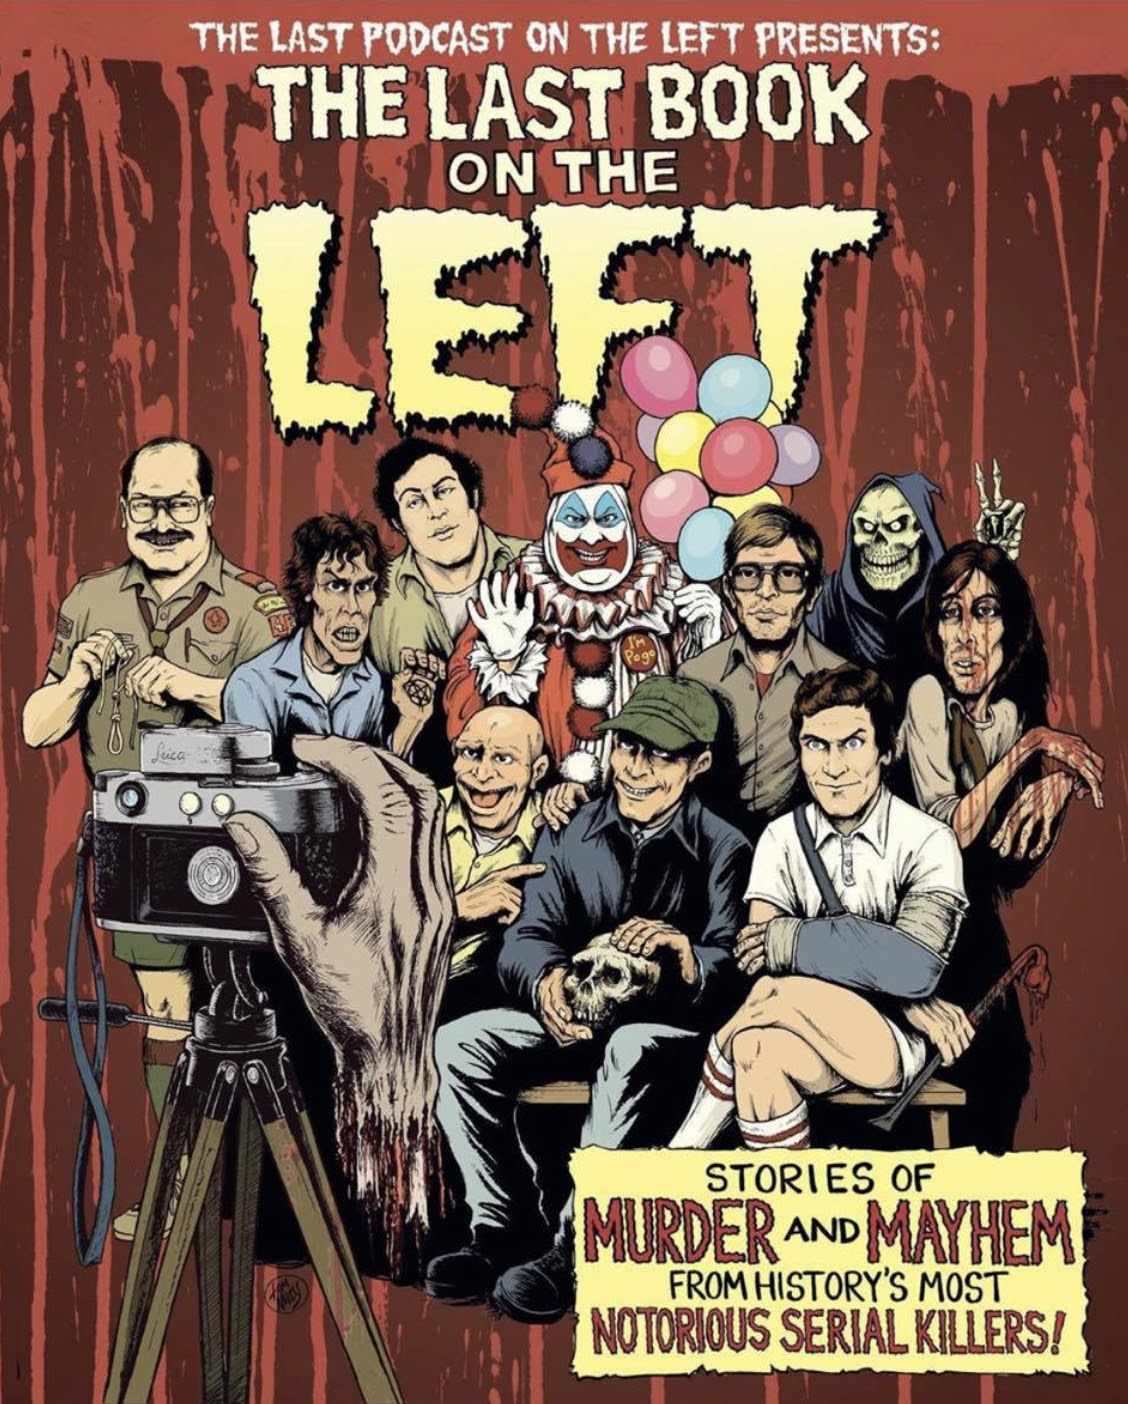 The Last Book on the Left: Stories of Murder and Mayhem from History?s Most Notorious Serial Killers in Kindle/PDF/EPUB